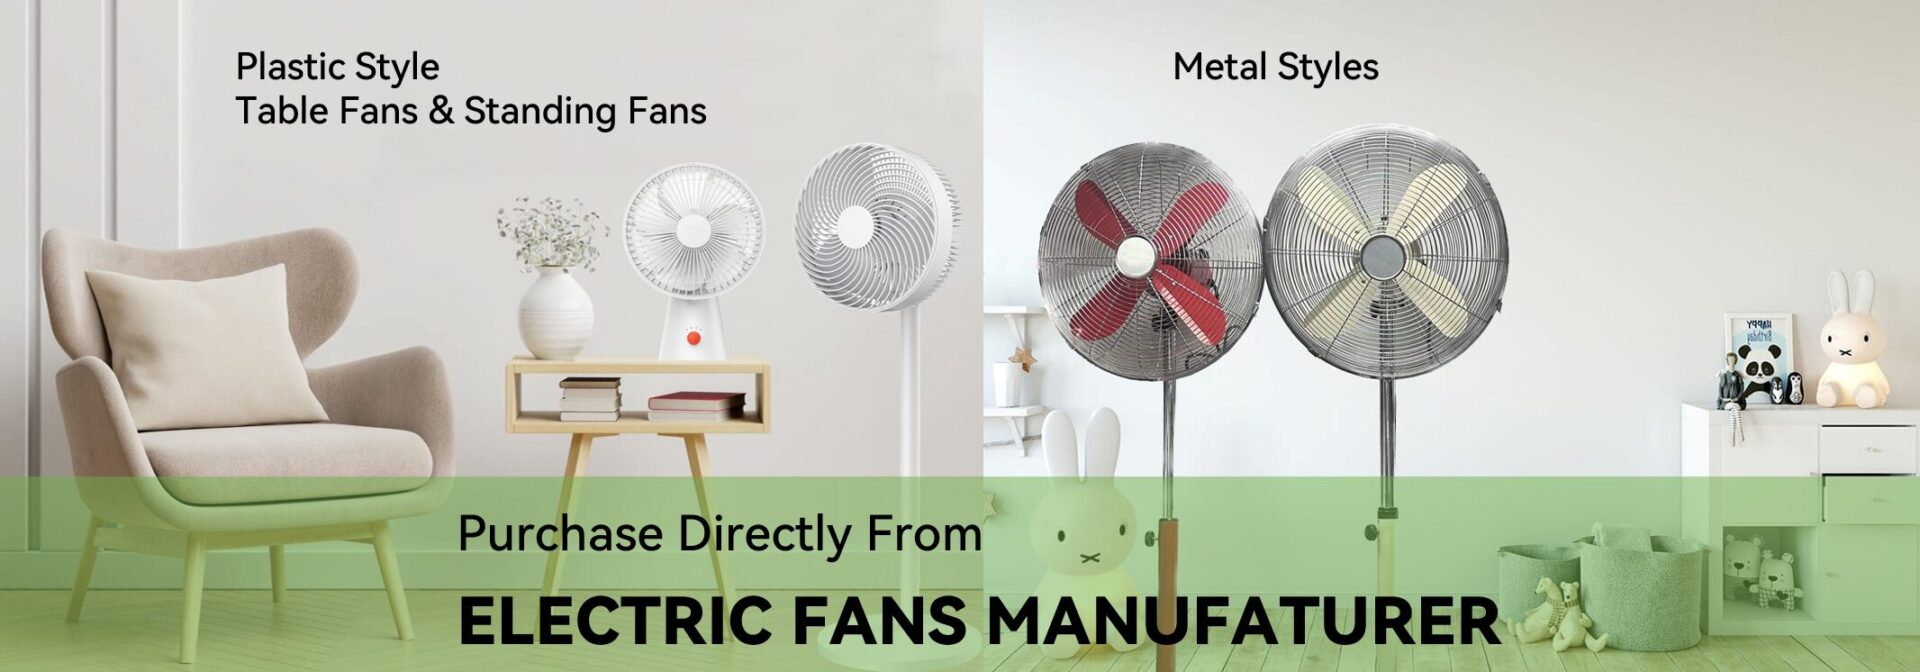 electric fans manufacturer & supplier in China_professional table fan and standing fan fanctory and supplier